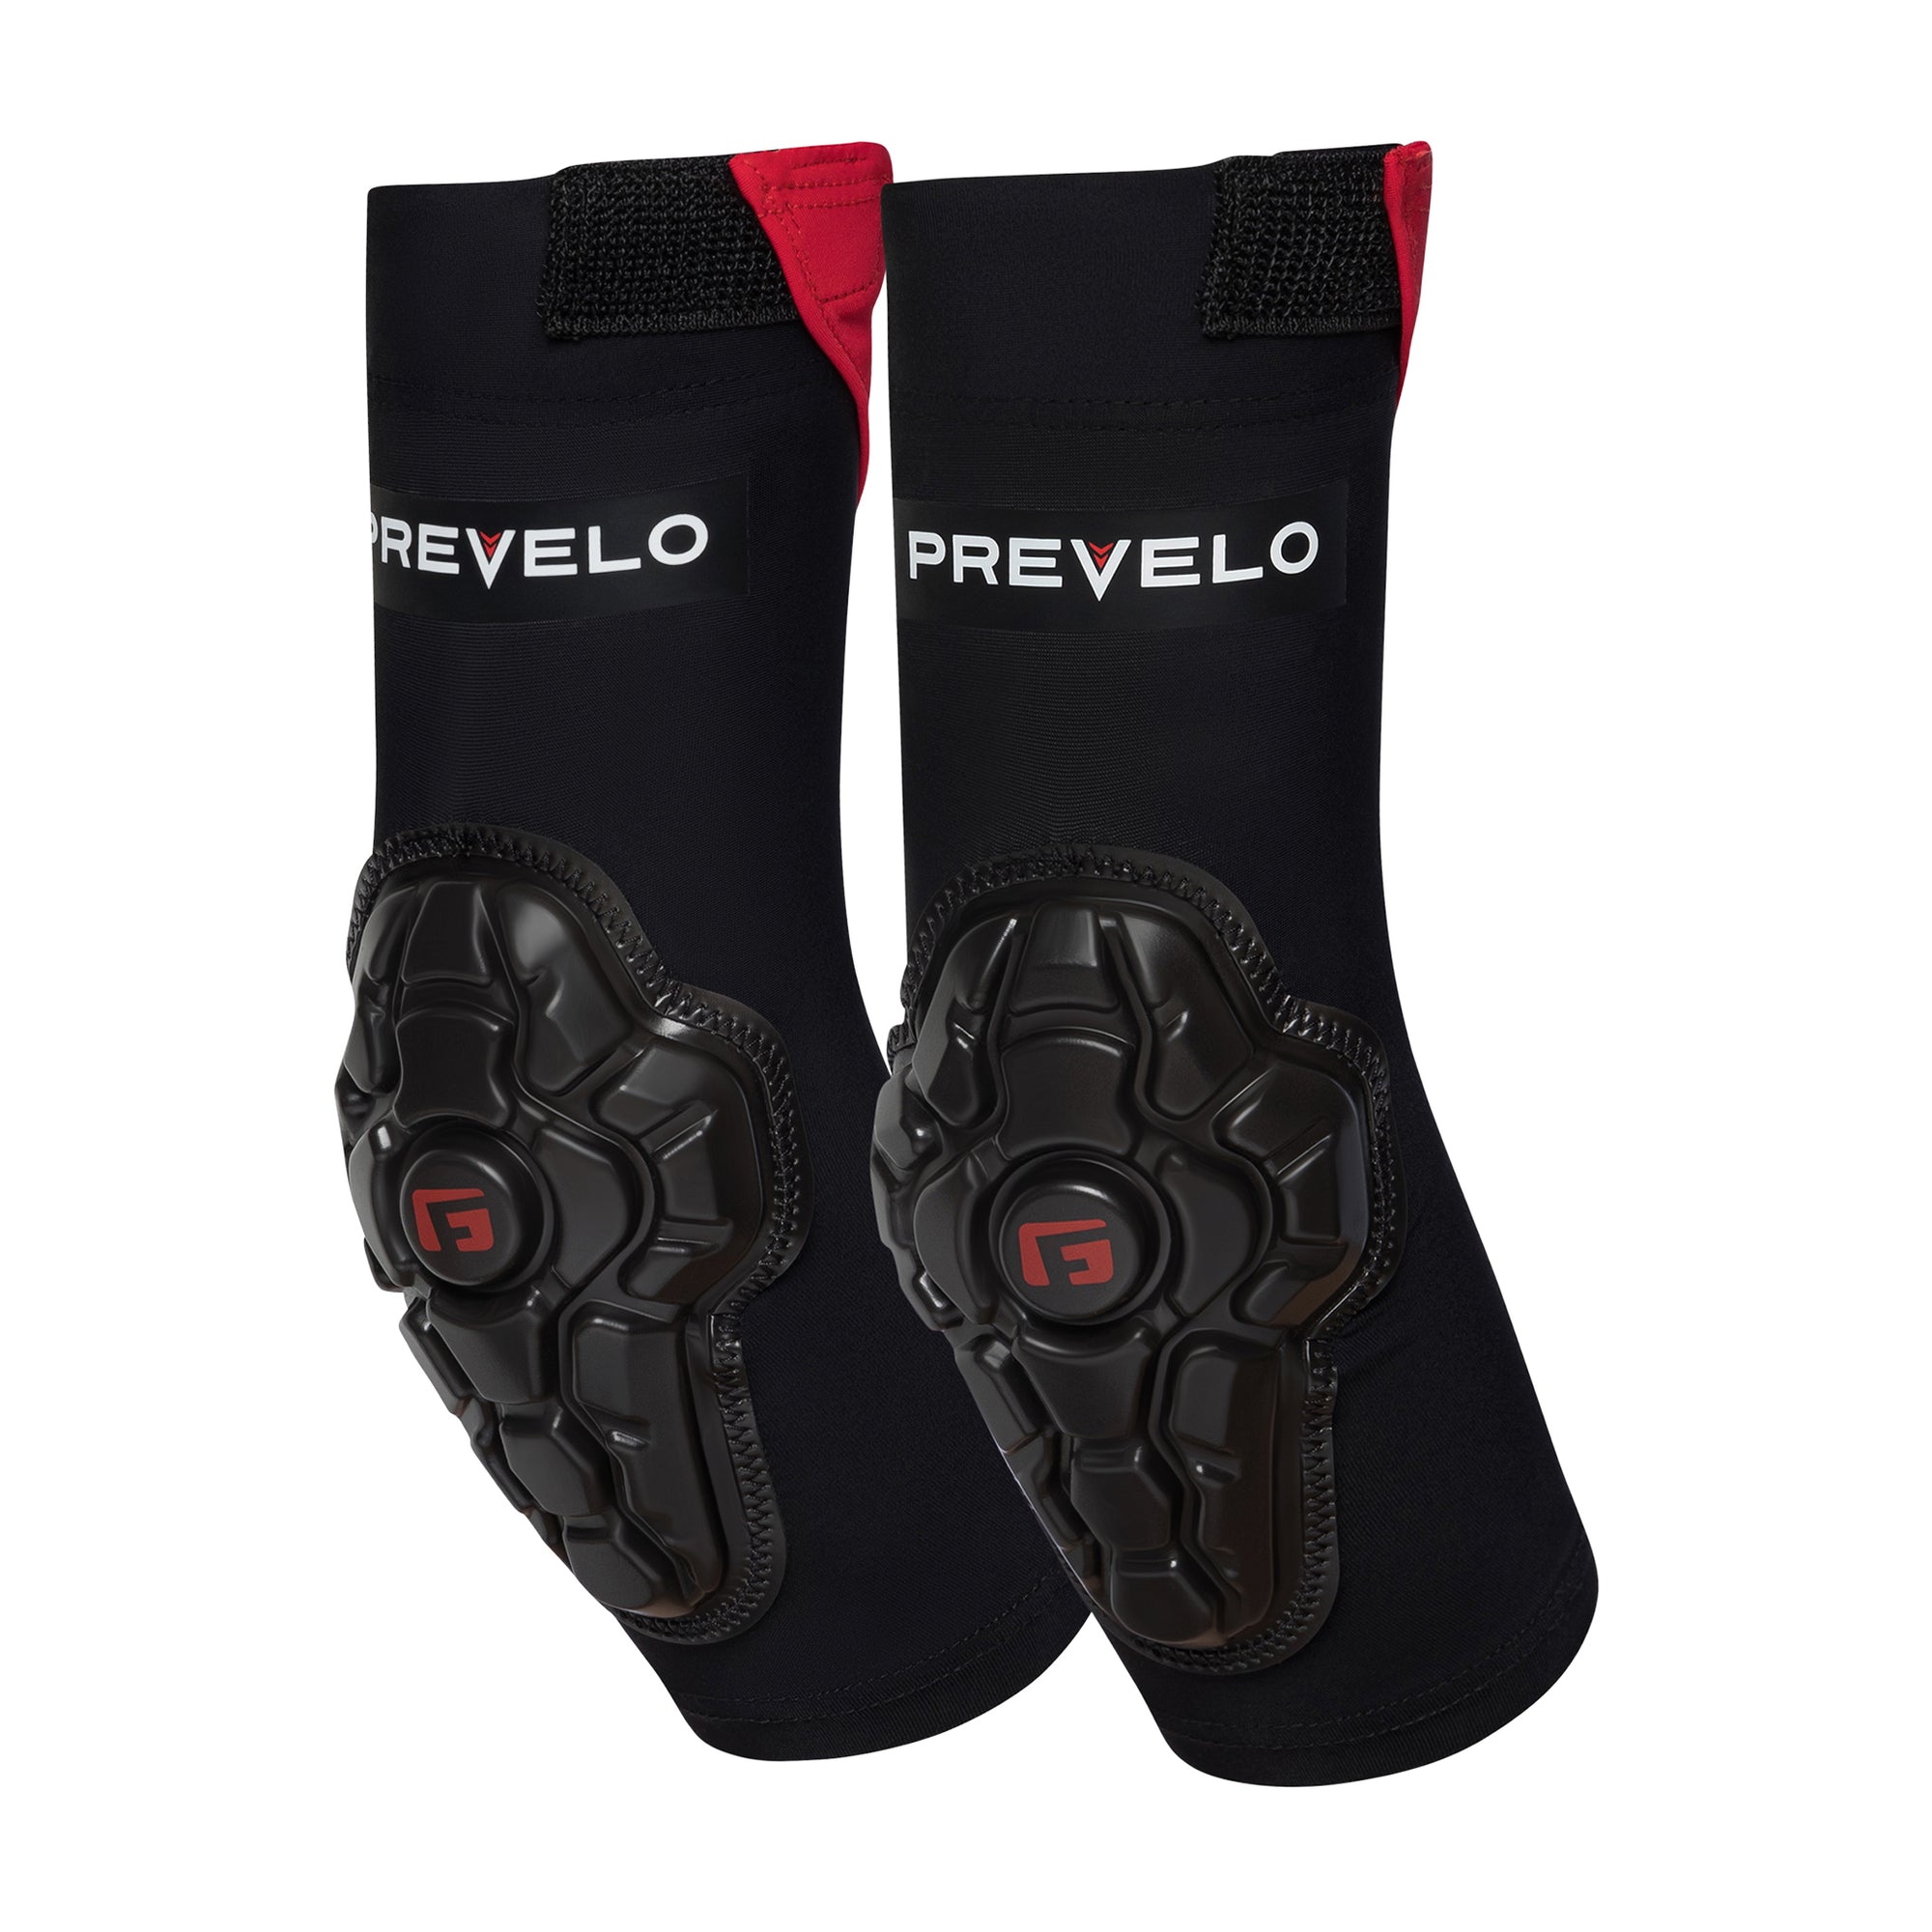 Prevelo Elbow Pads by G-Form